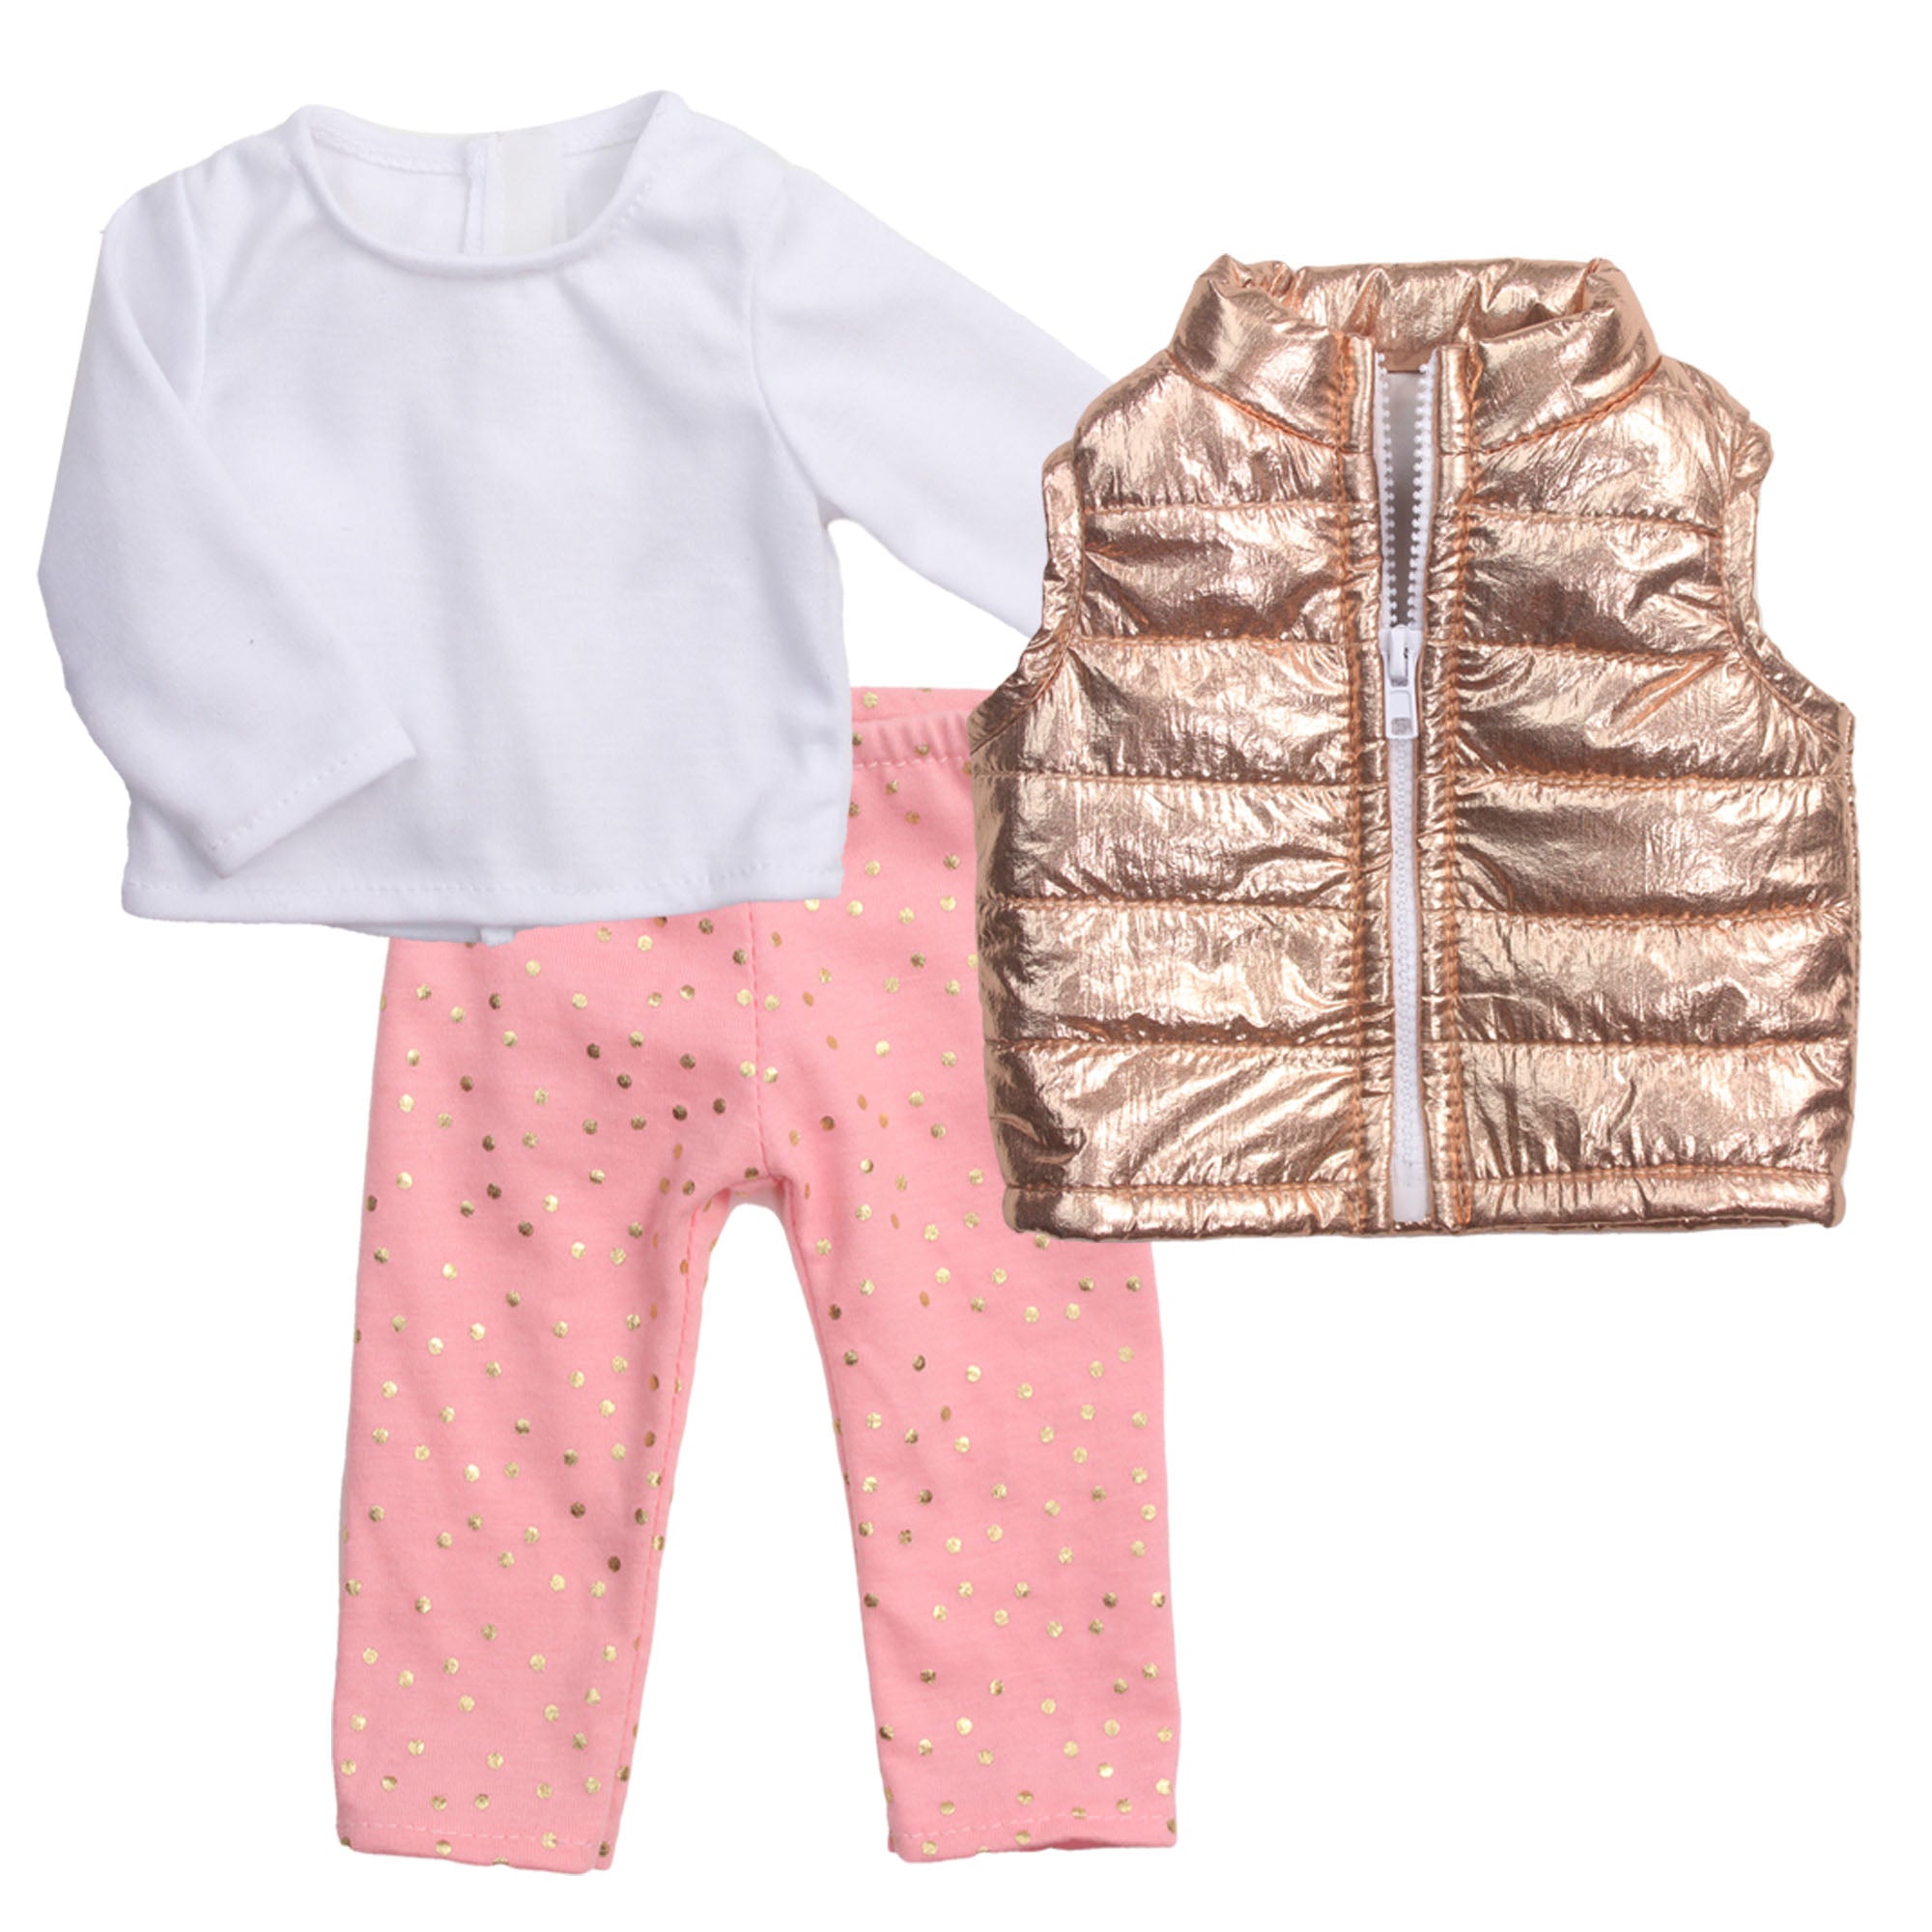 Sophia’s Metallic Zip-Up Vest, Peach Leggings with Gold Polka Dots, & White Long-Sleeved T-Shirt Complete Outfit Set for 18” Dolls, Gold